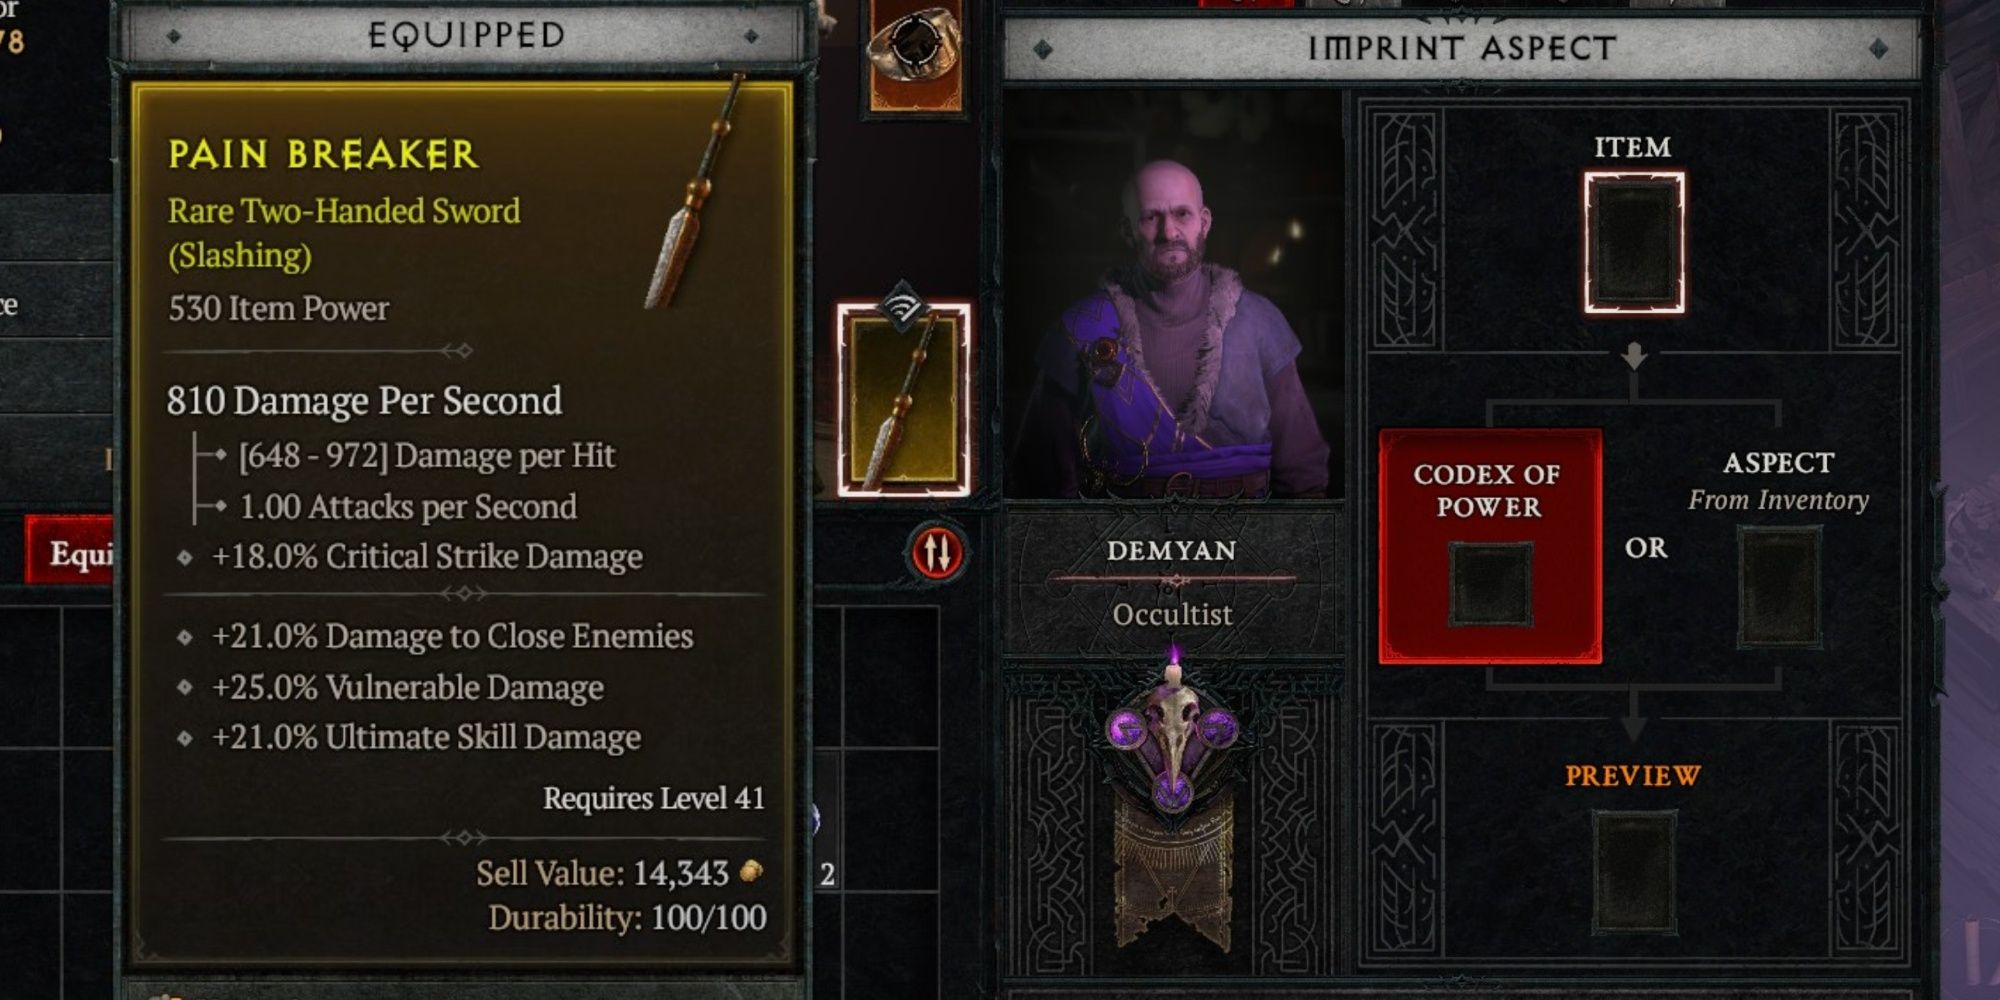 Pain Breaker Sword Stat Panel And Occultist Interface In Diablo 4